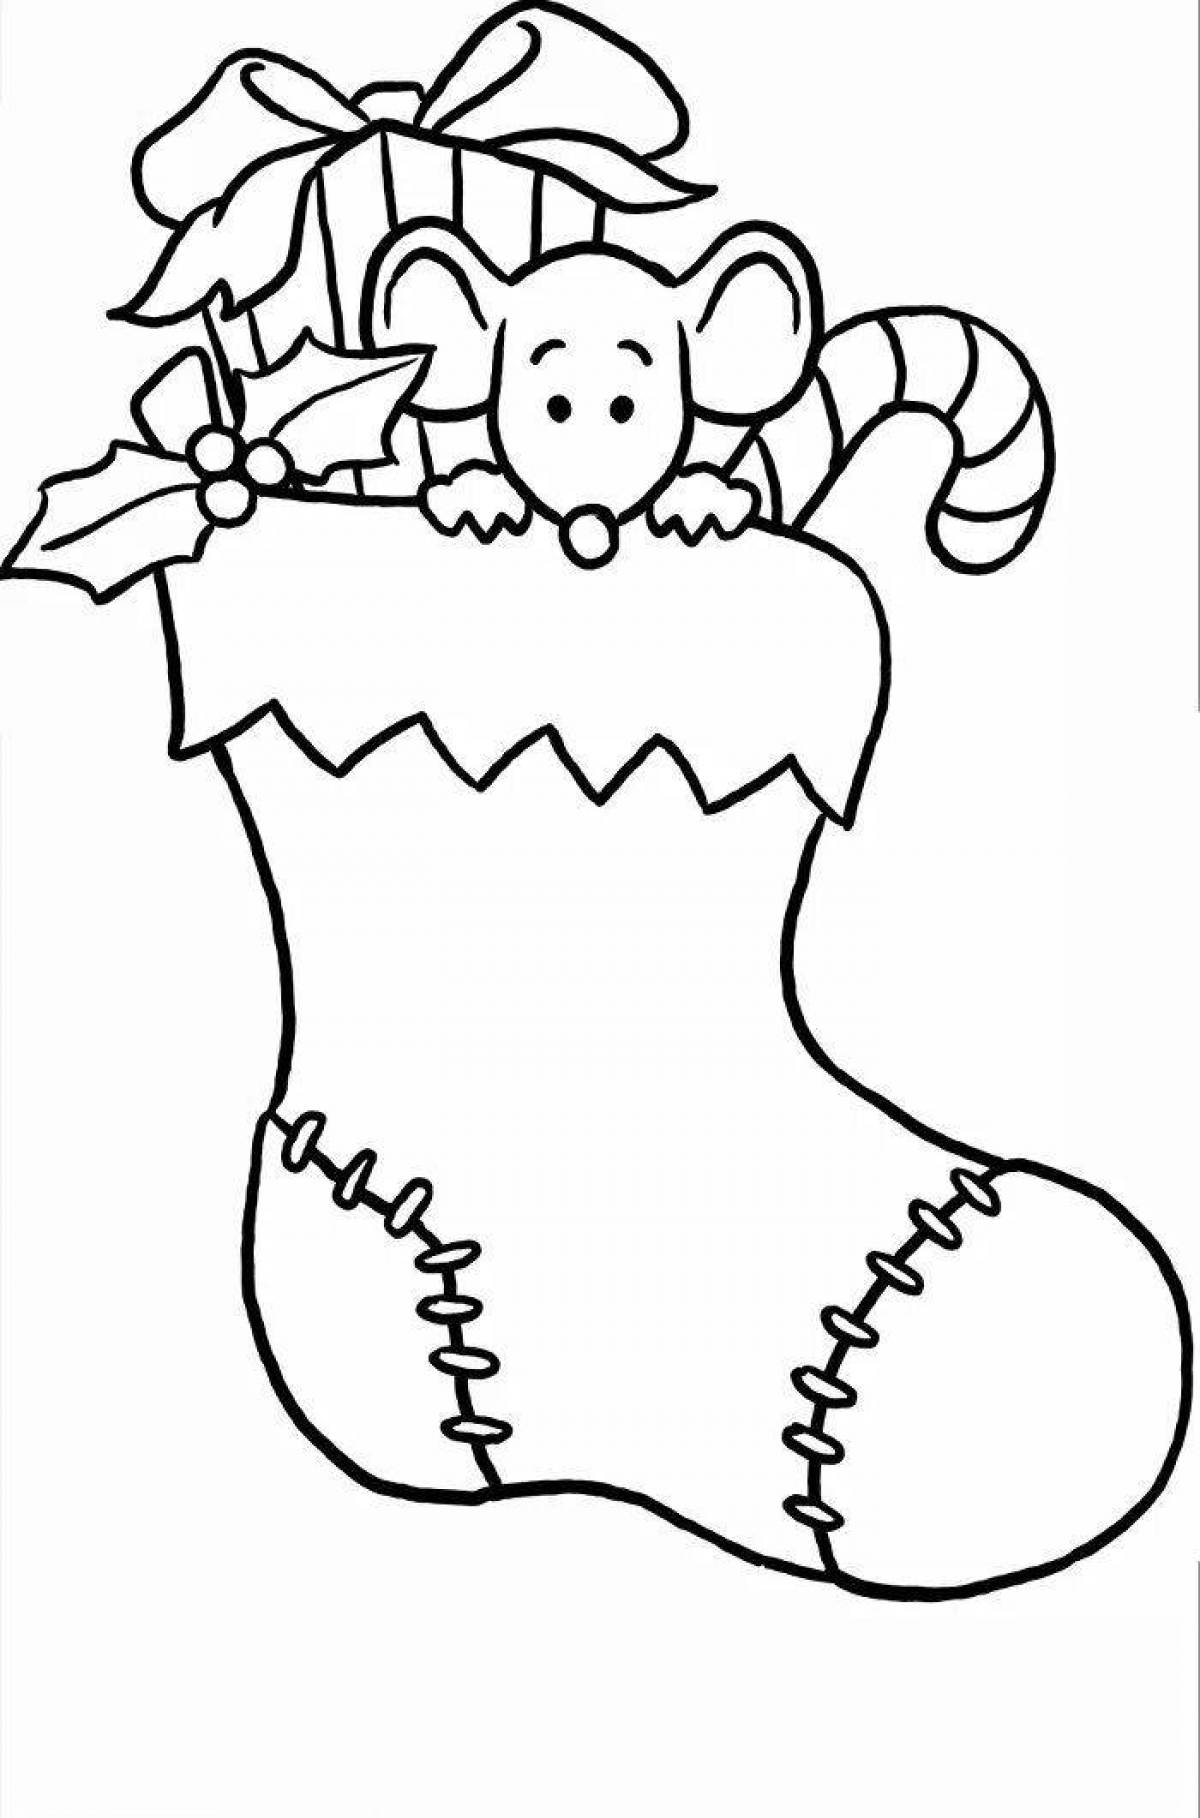 Majestic Christmas boot coloring book